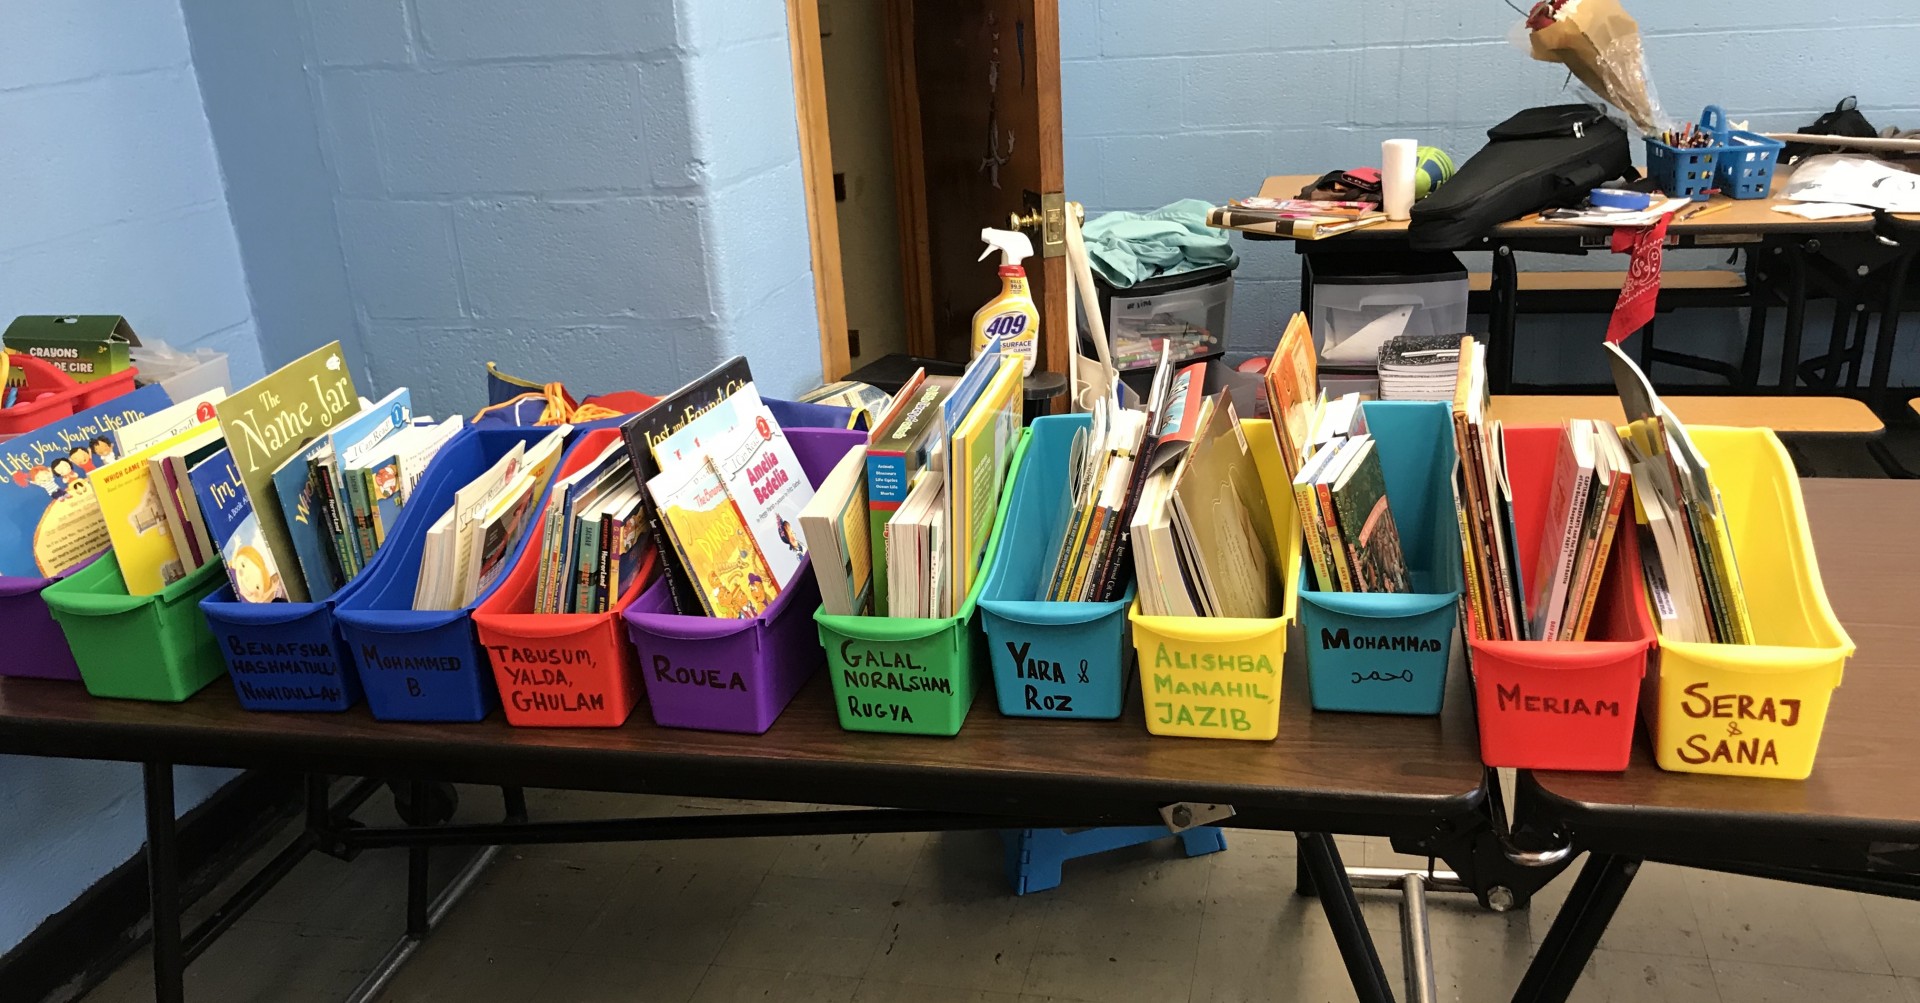 The book caddies that I put together for the refugee children.